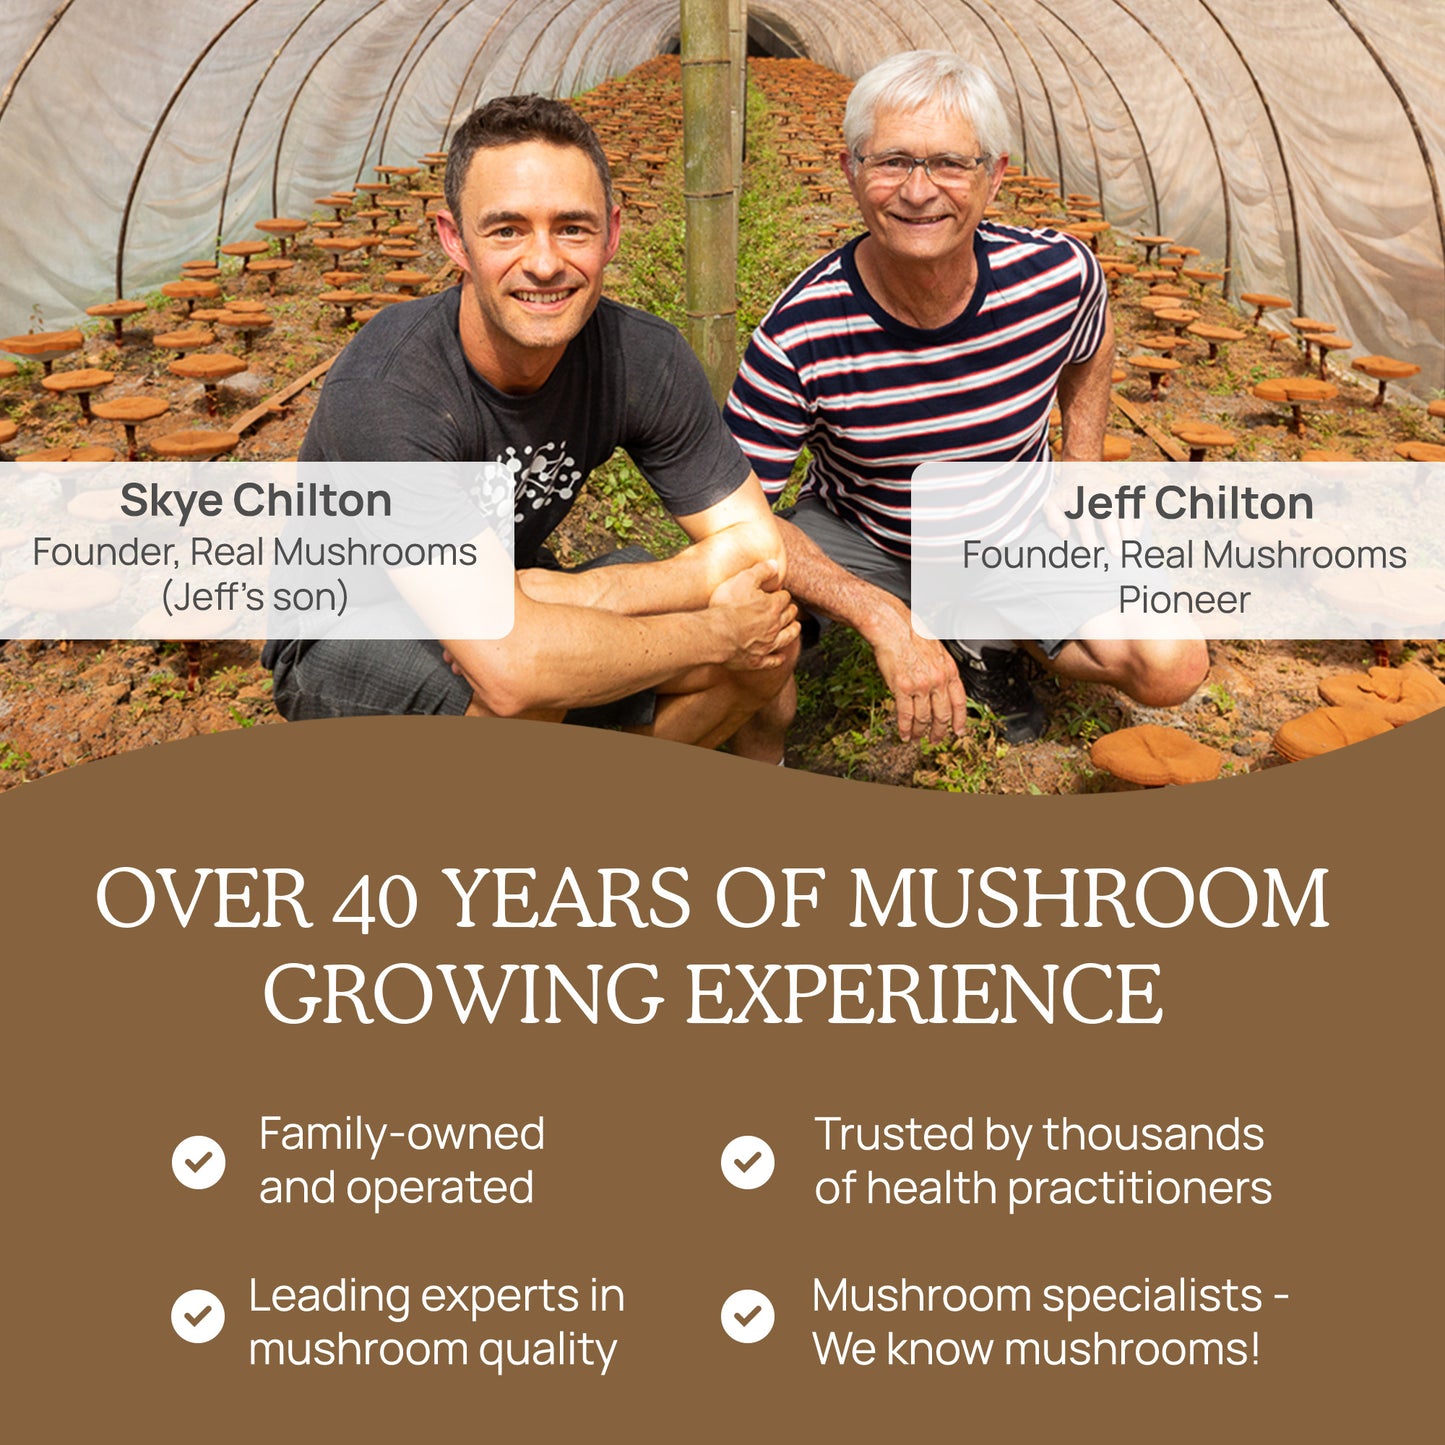 Two men smiling inside an organic mushroom-growing facility, highlighting over 40 years of expertise in Real Mushrooms' Lions Mane mushrooms cultivation and a family-owned business.